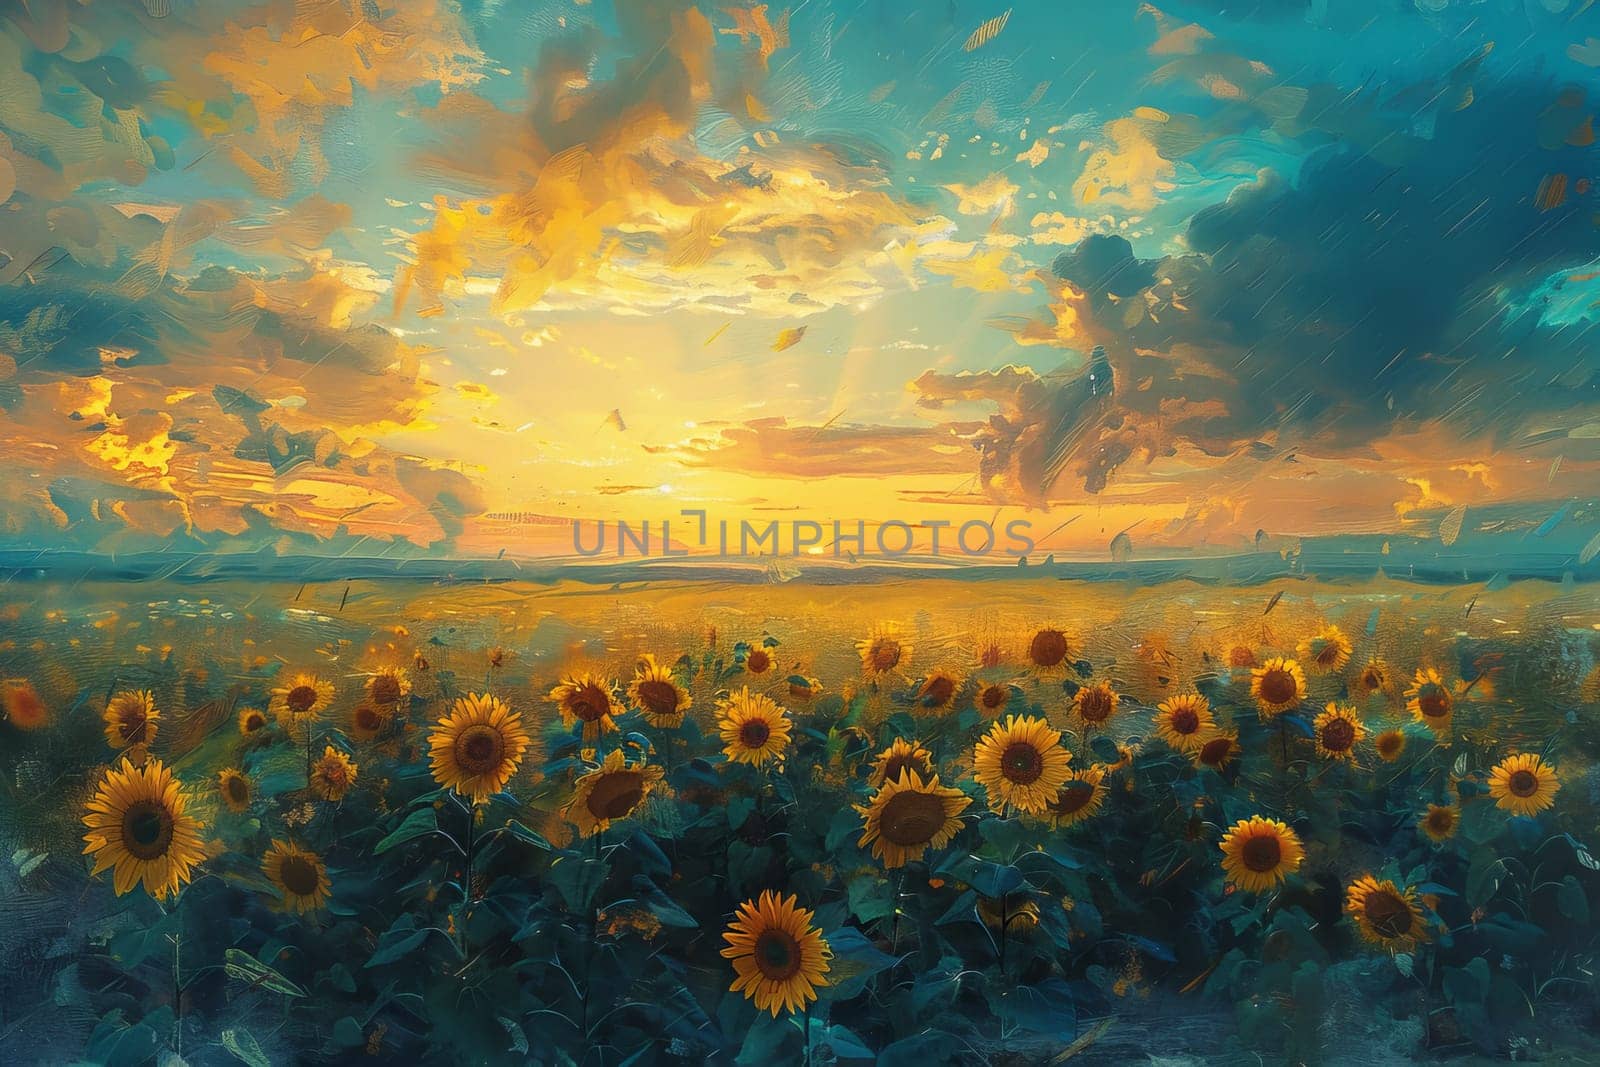 A painting of a field of sunflowers with a cloudy sky in the background. The painting conveys a sense of tranquility and beauty, as the sunflowers are the main focus